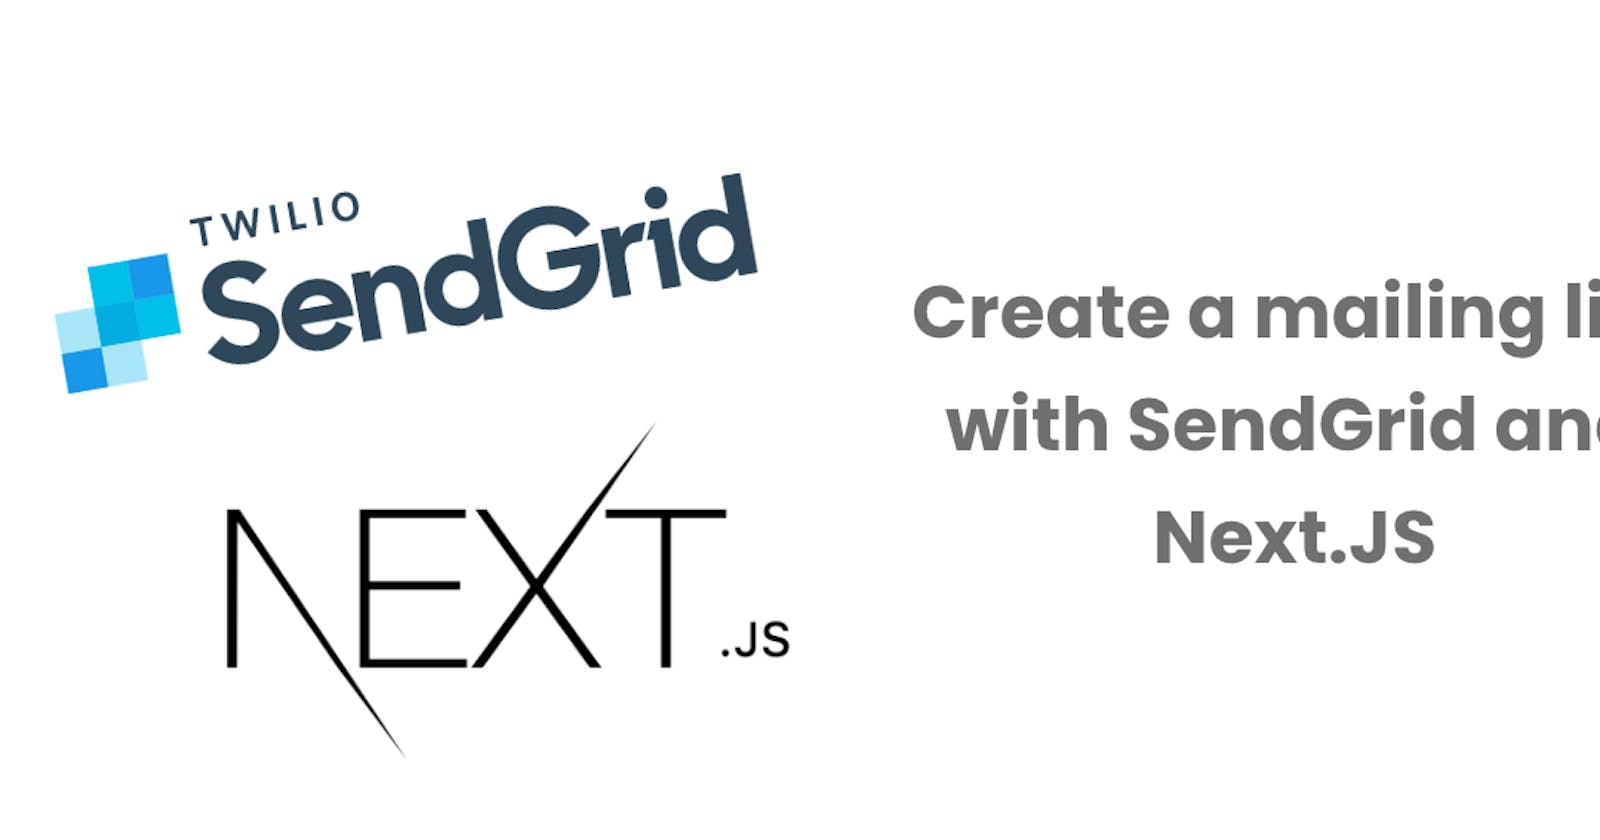 Create a mailing list with SendGrid and Next.js